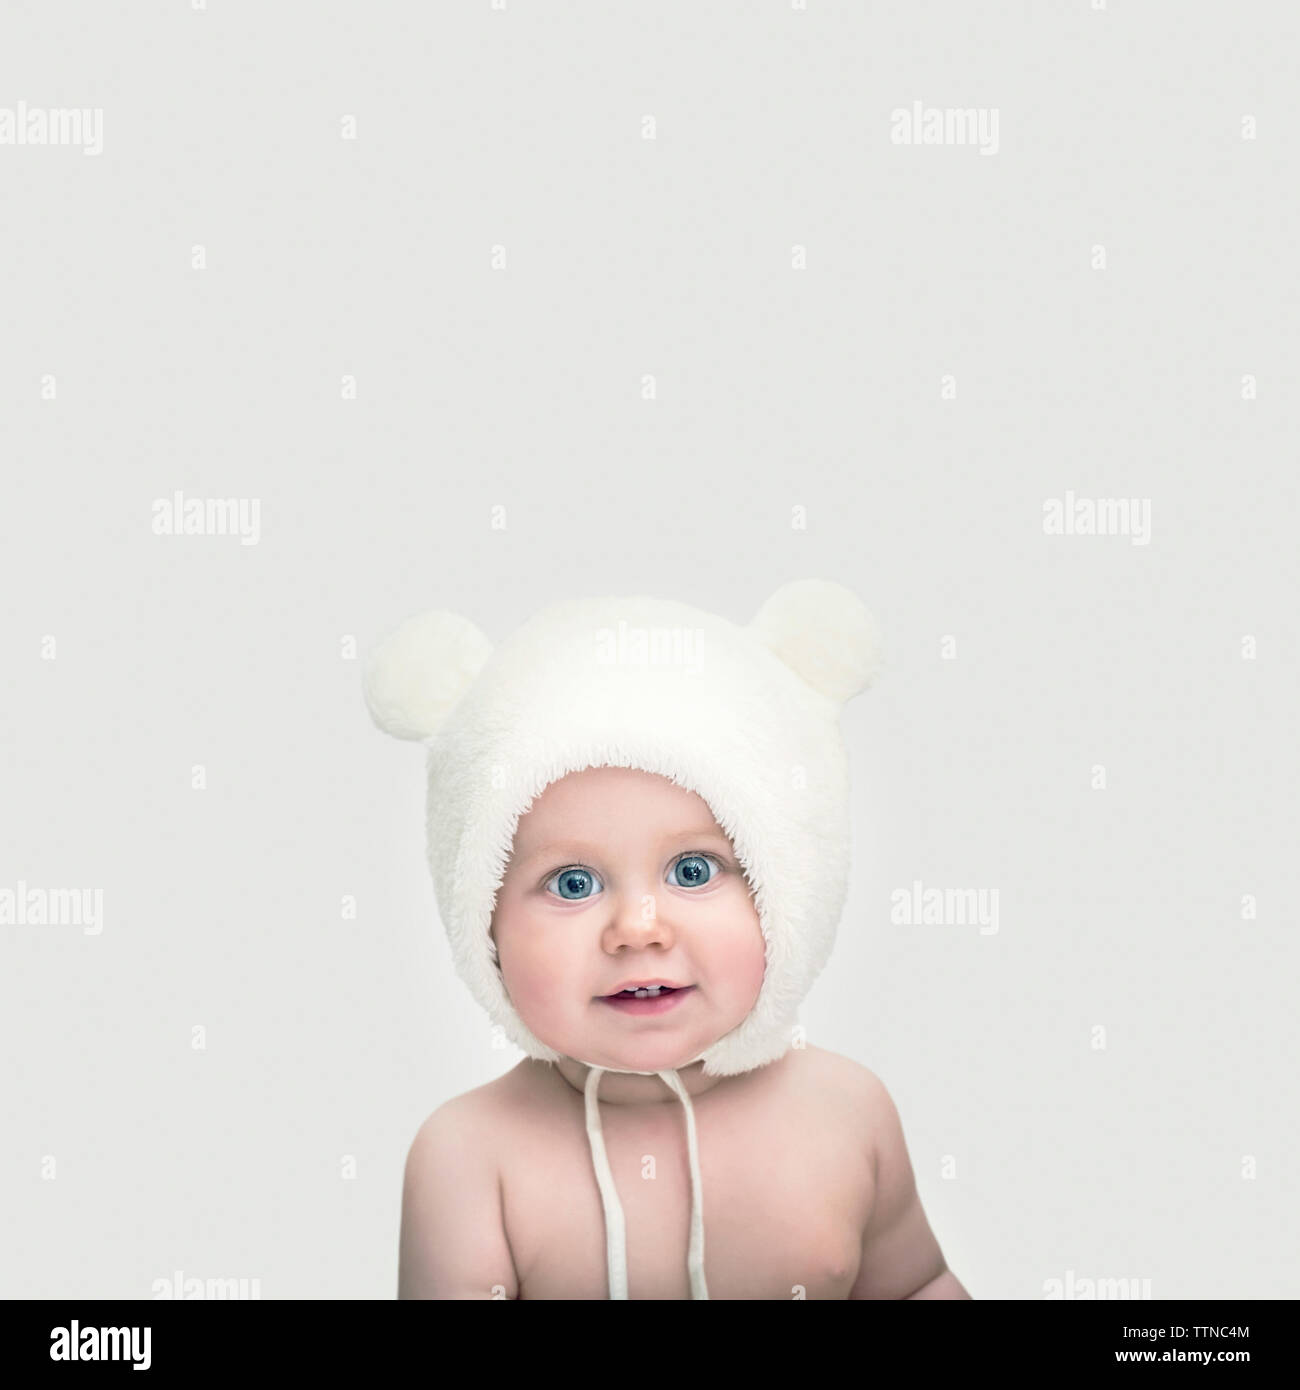 Cute baby in a hat with ears Stock Photo